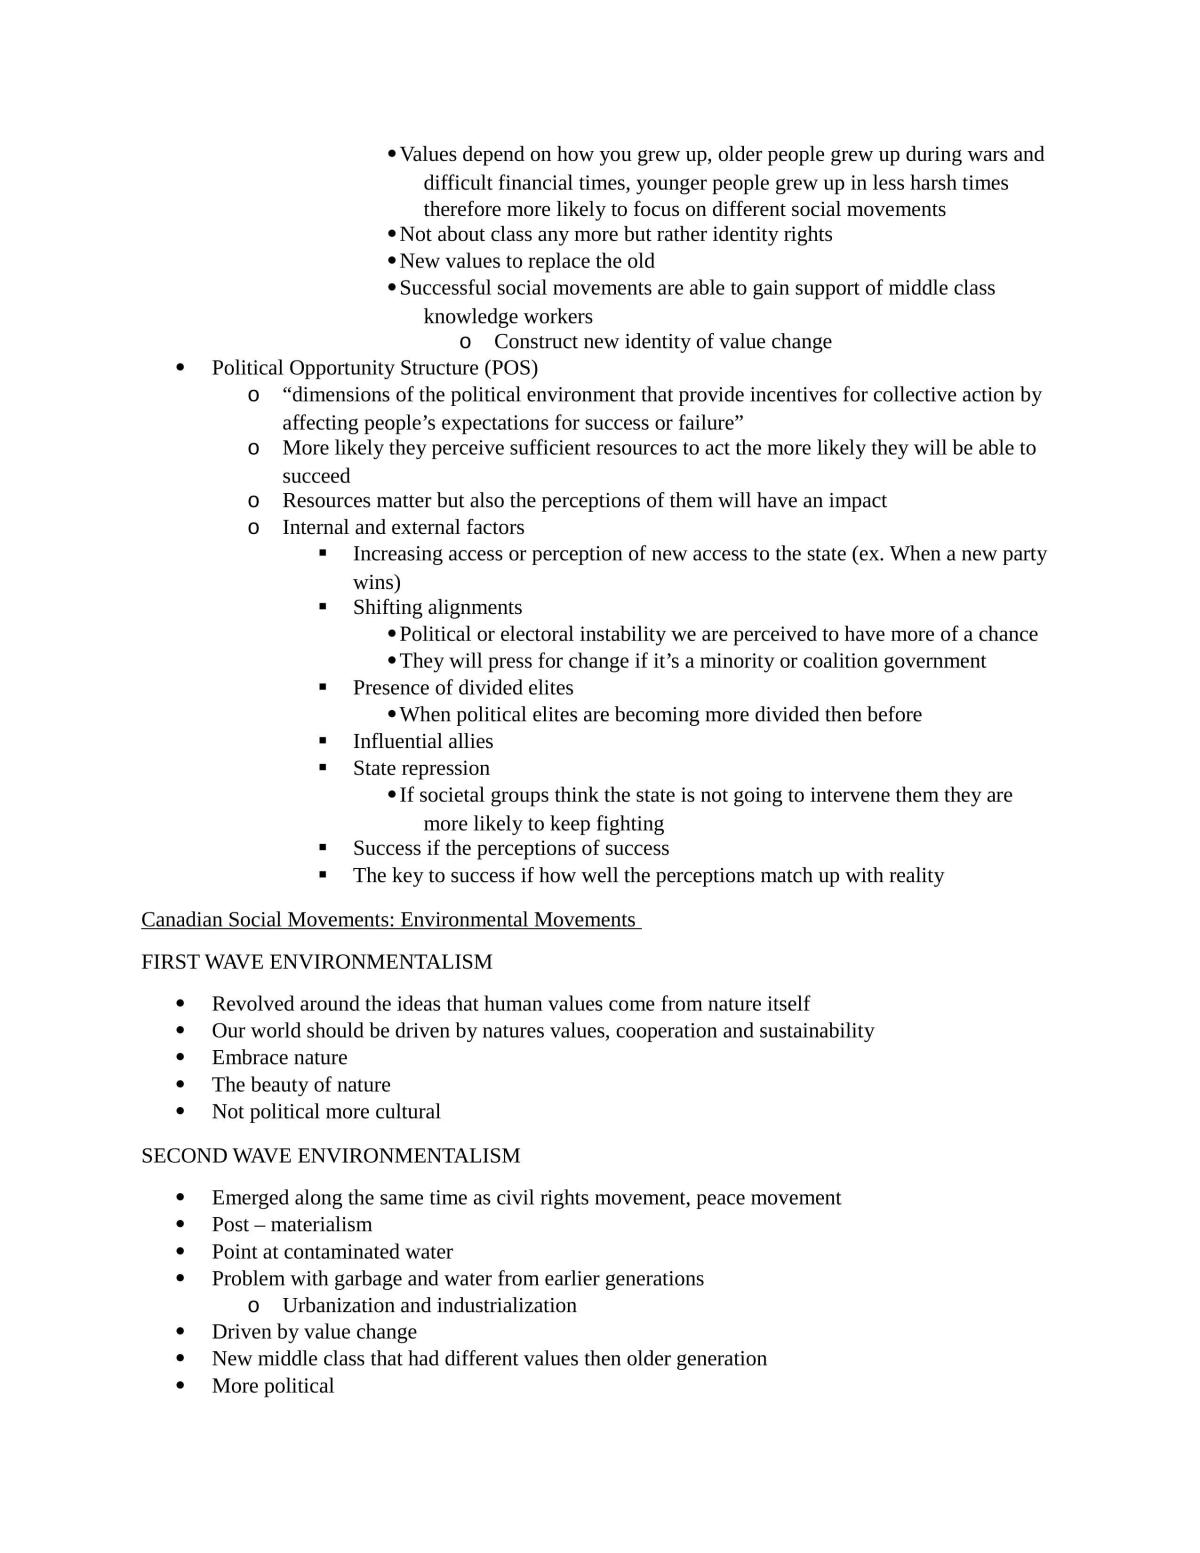 Complete Study Notes - POL 2230E - Page 24